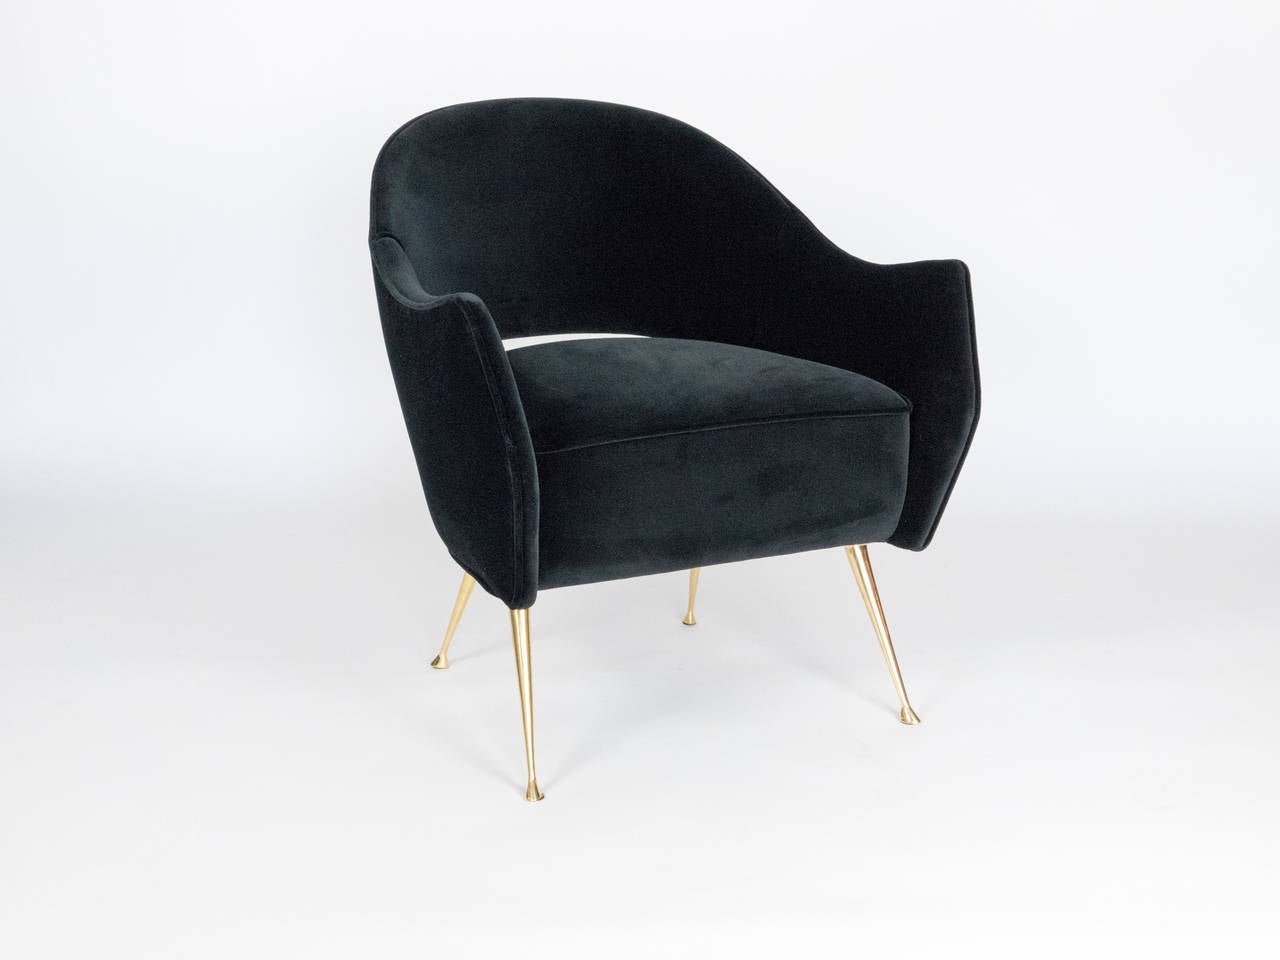 Two elegant chairs with cast brass legs and a distinctive curved back.
The chairs are very comfortable, perfect in size and are ideal as small
scale side chairs. The beauty of the tapered brass legs with their graceful
feet are sure to add that